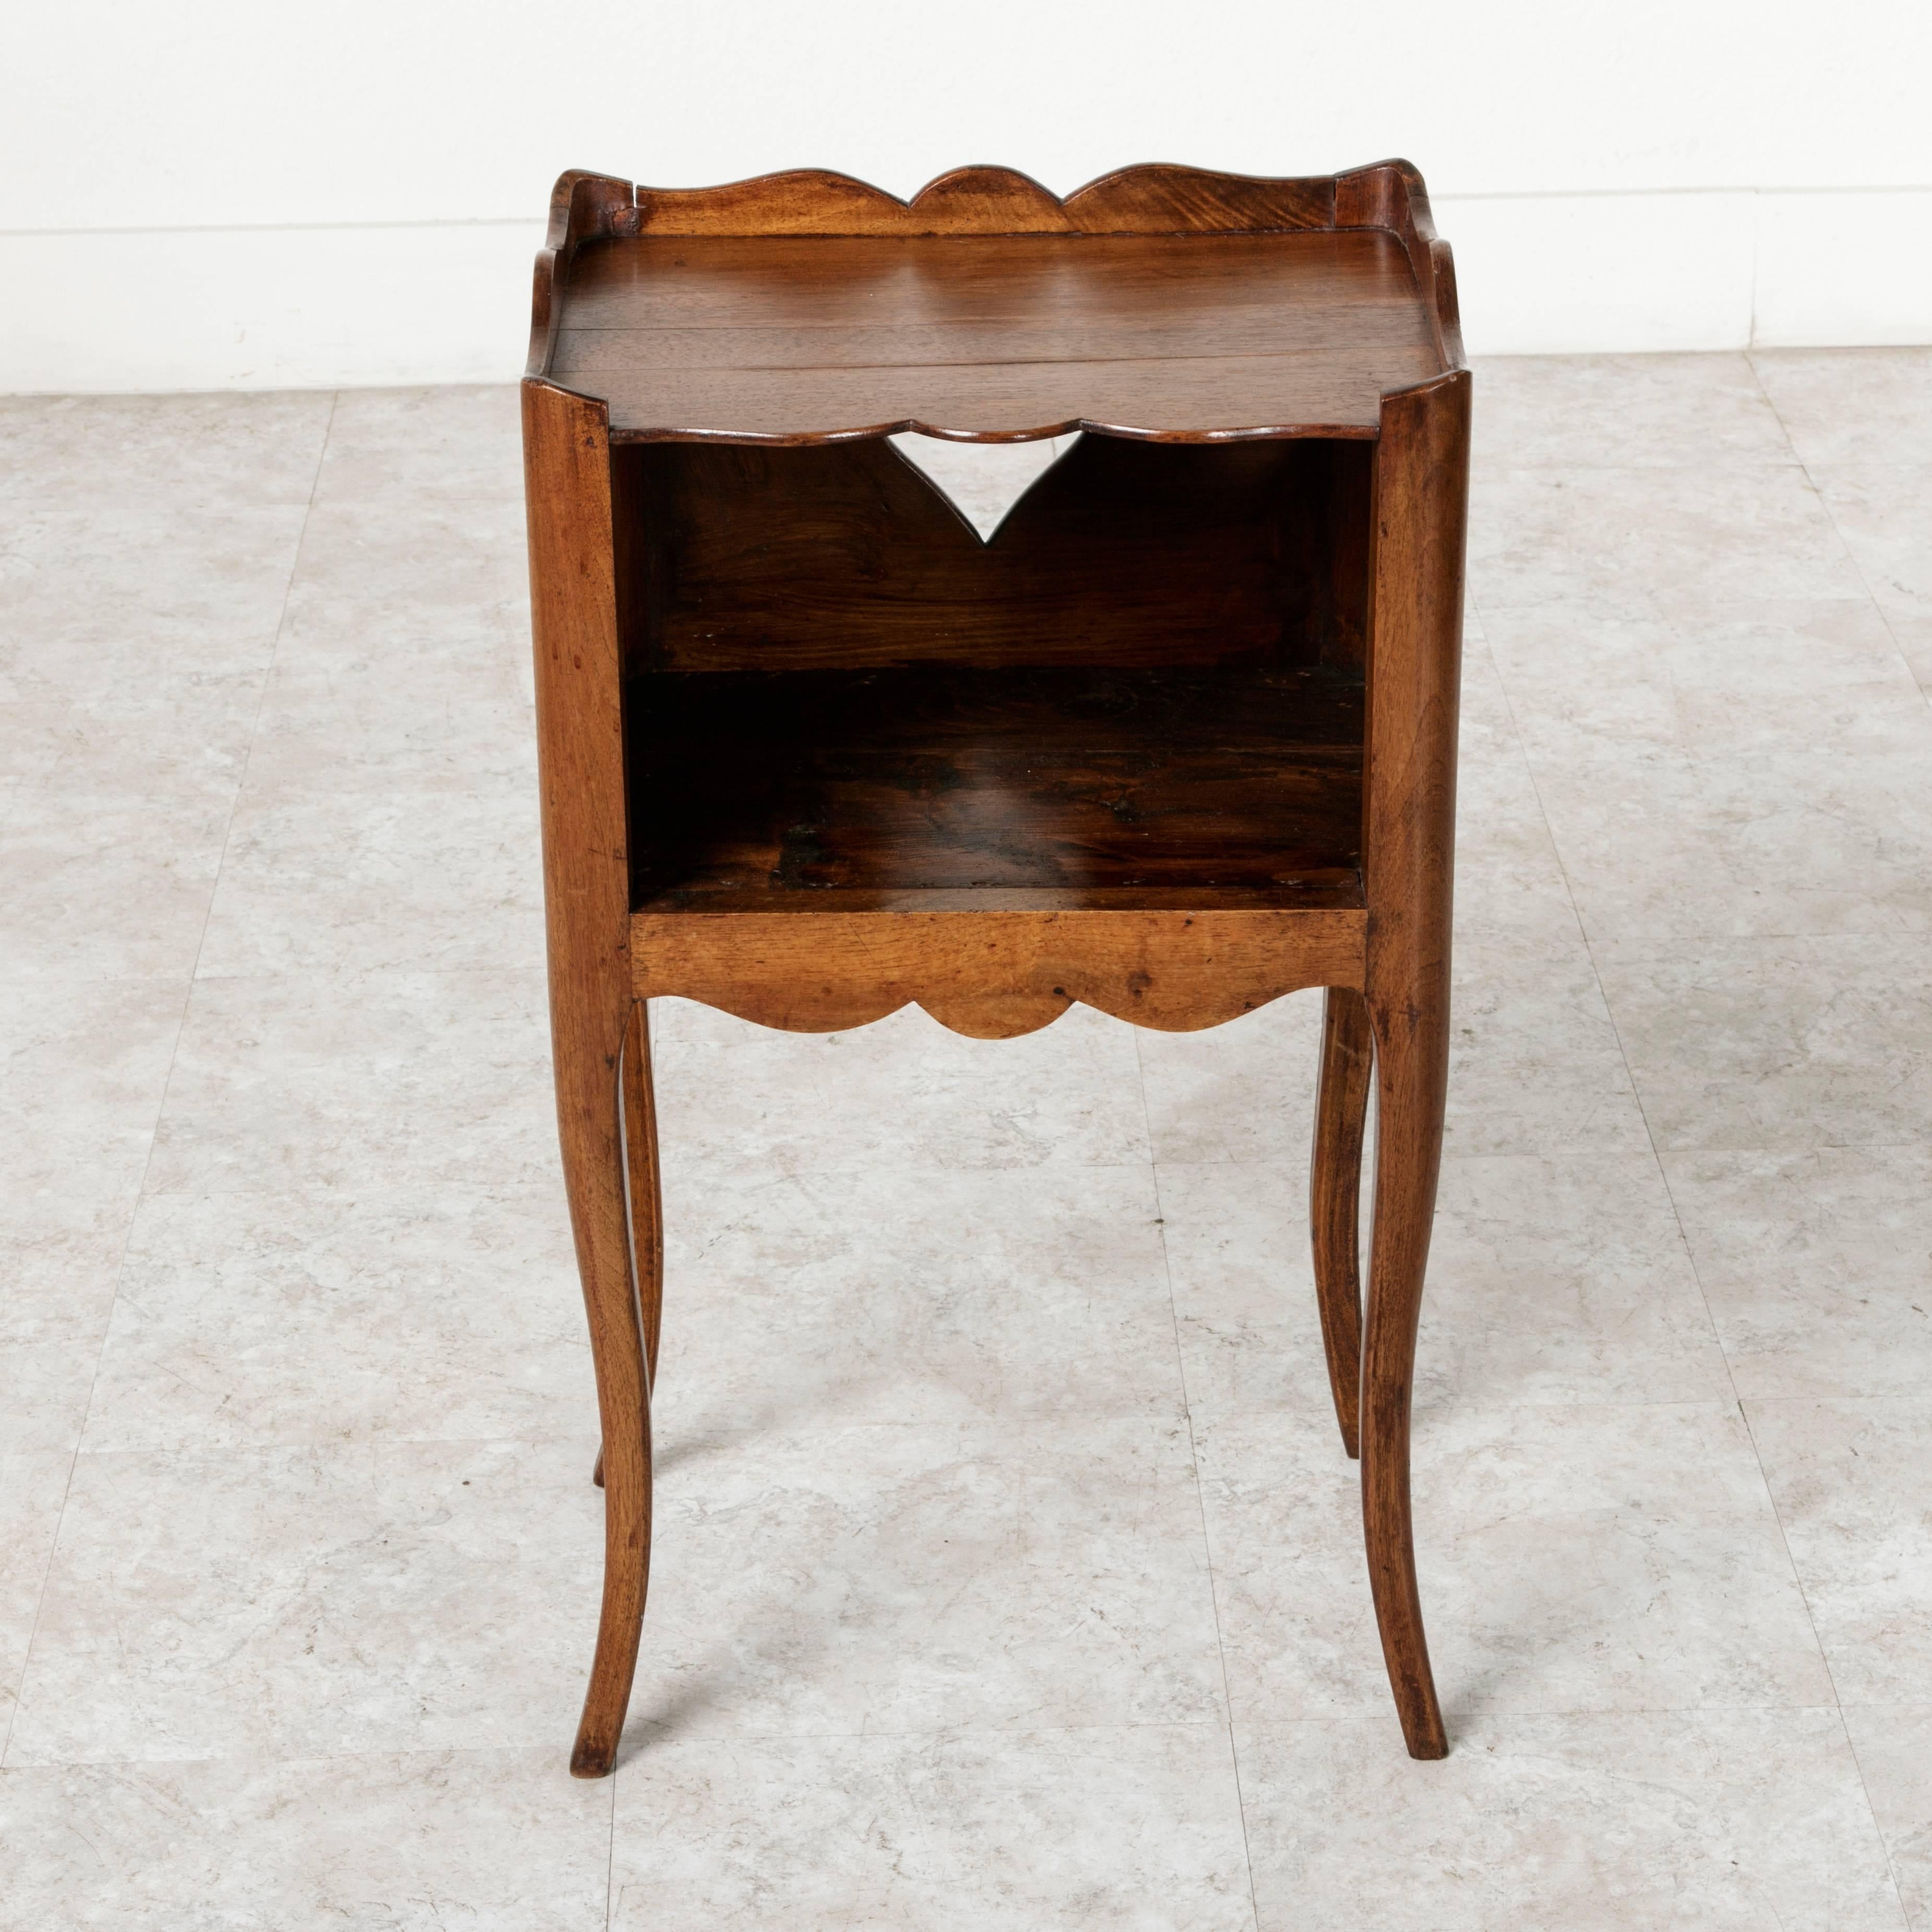 This late 19th century Louis XV style walnut nightstand or side table features elegant cabriole legs and an interior niche. Its top is surrounded by a scalloped gallery on three sides. Cutouts on the sides originally allowed for easier lifting and